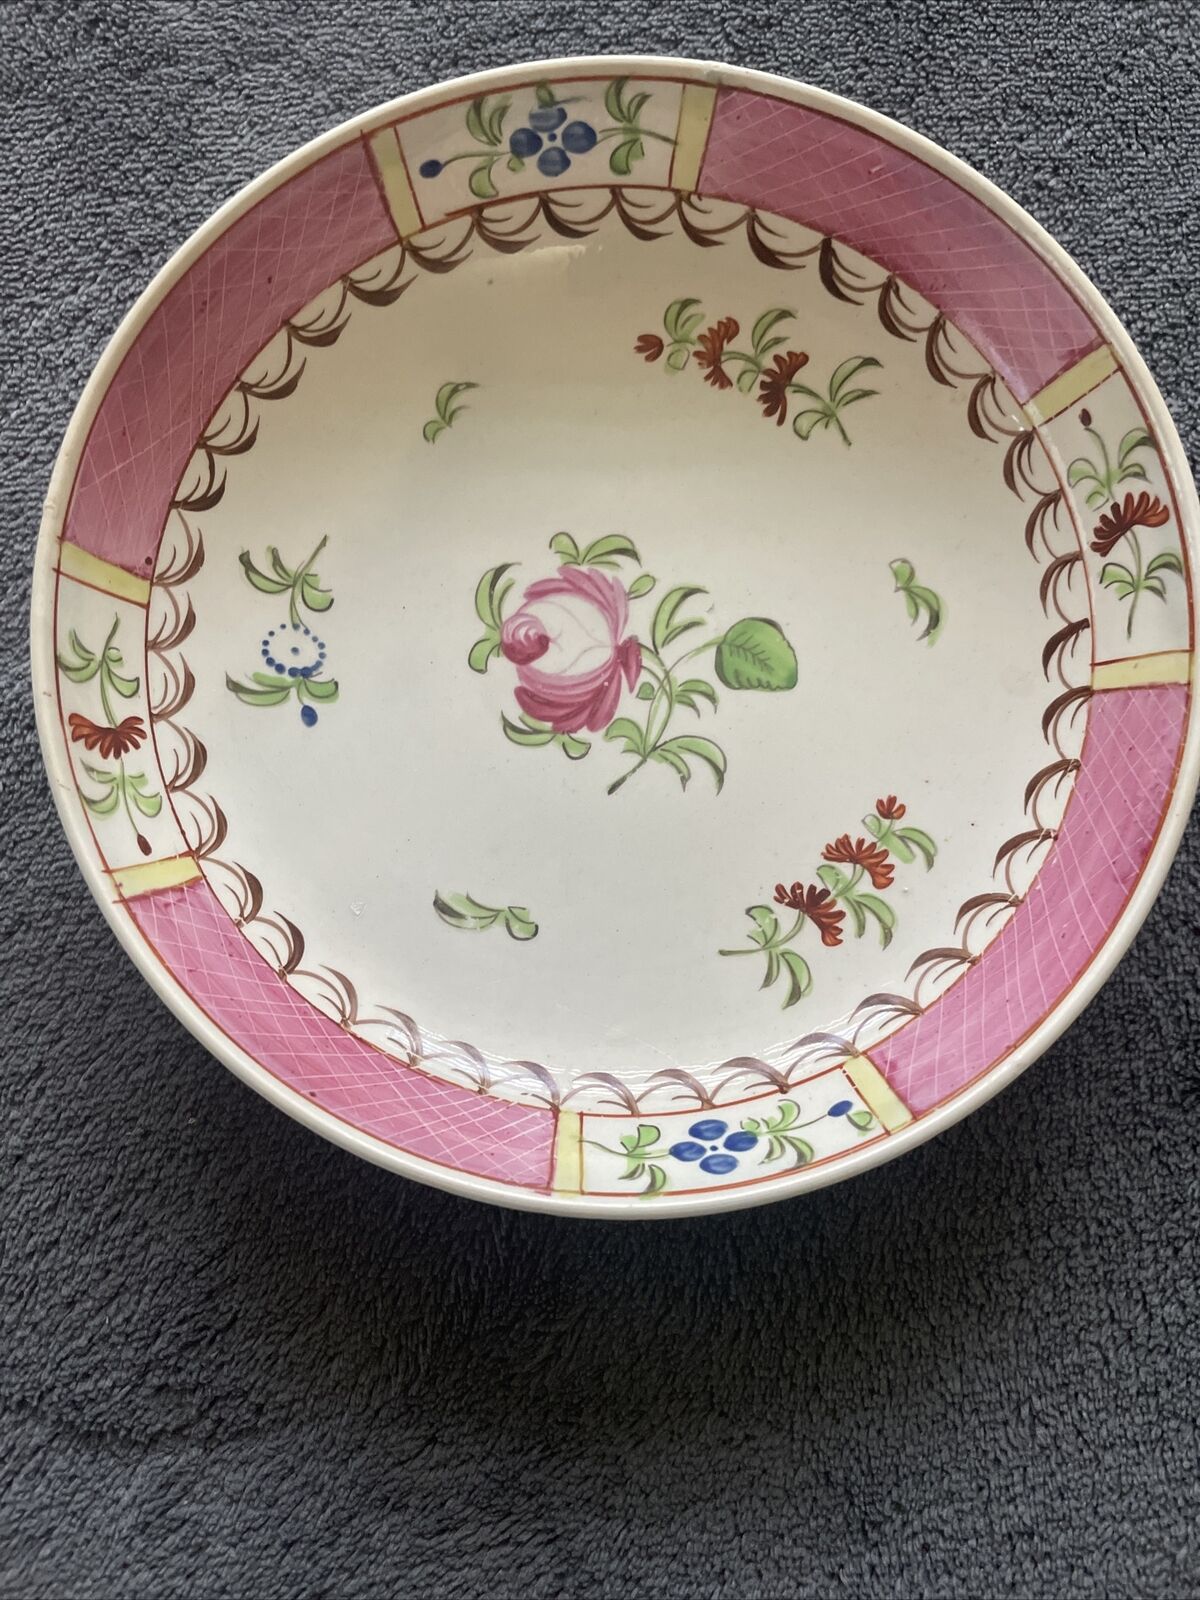 Antique English Creamware Pearlware Saucer King's Rose Plate 18th 19th c. 1800